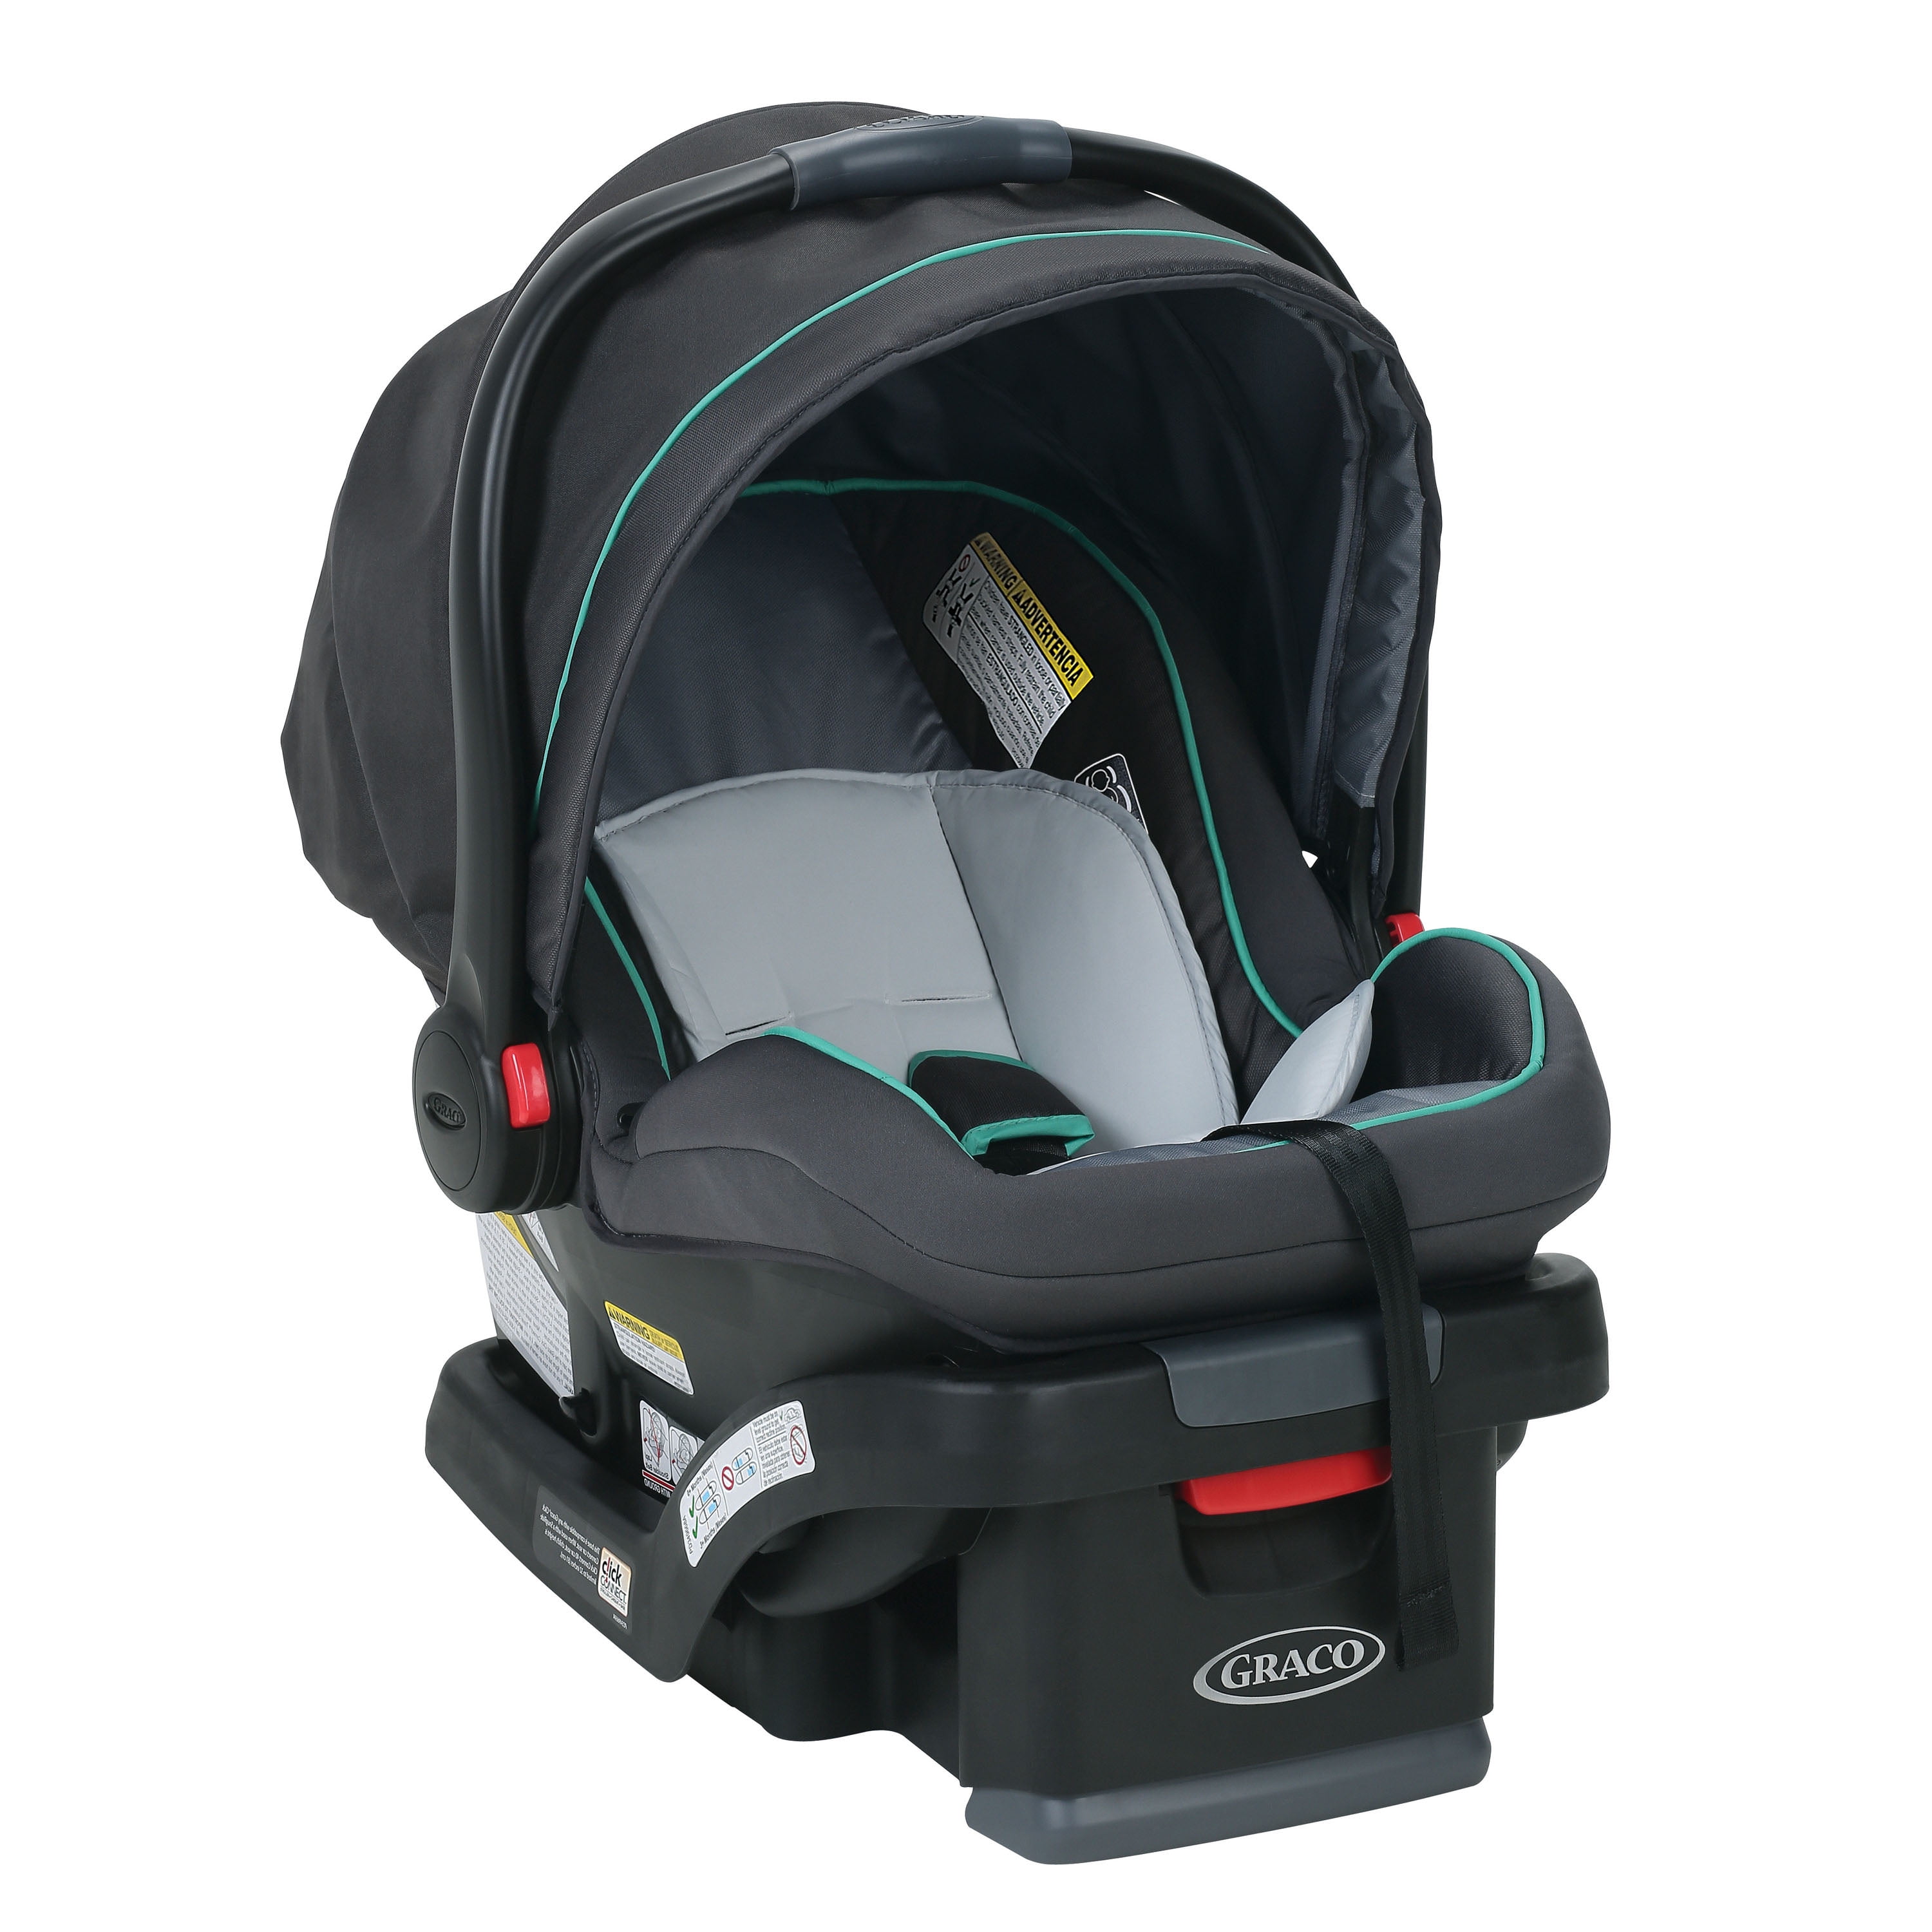 Graco Car Seat Infant Weight Limit Velcromag